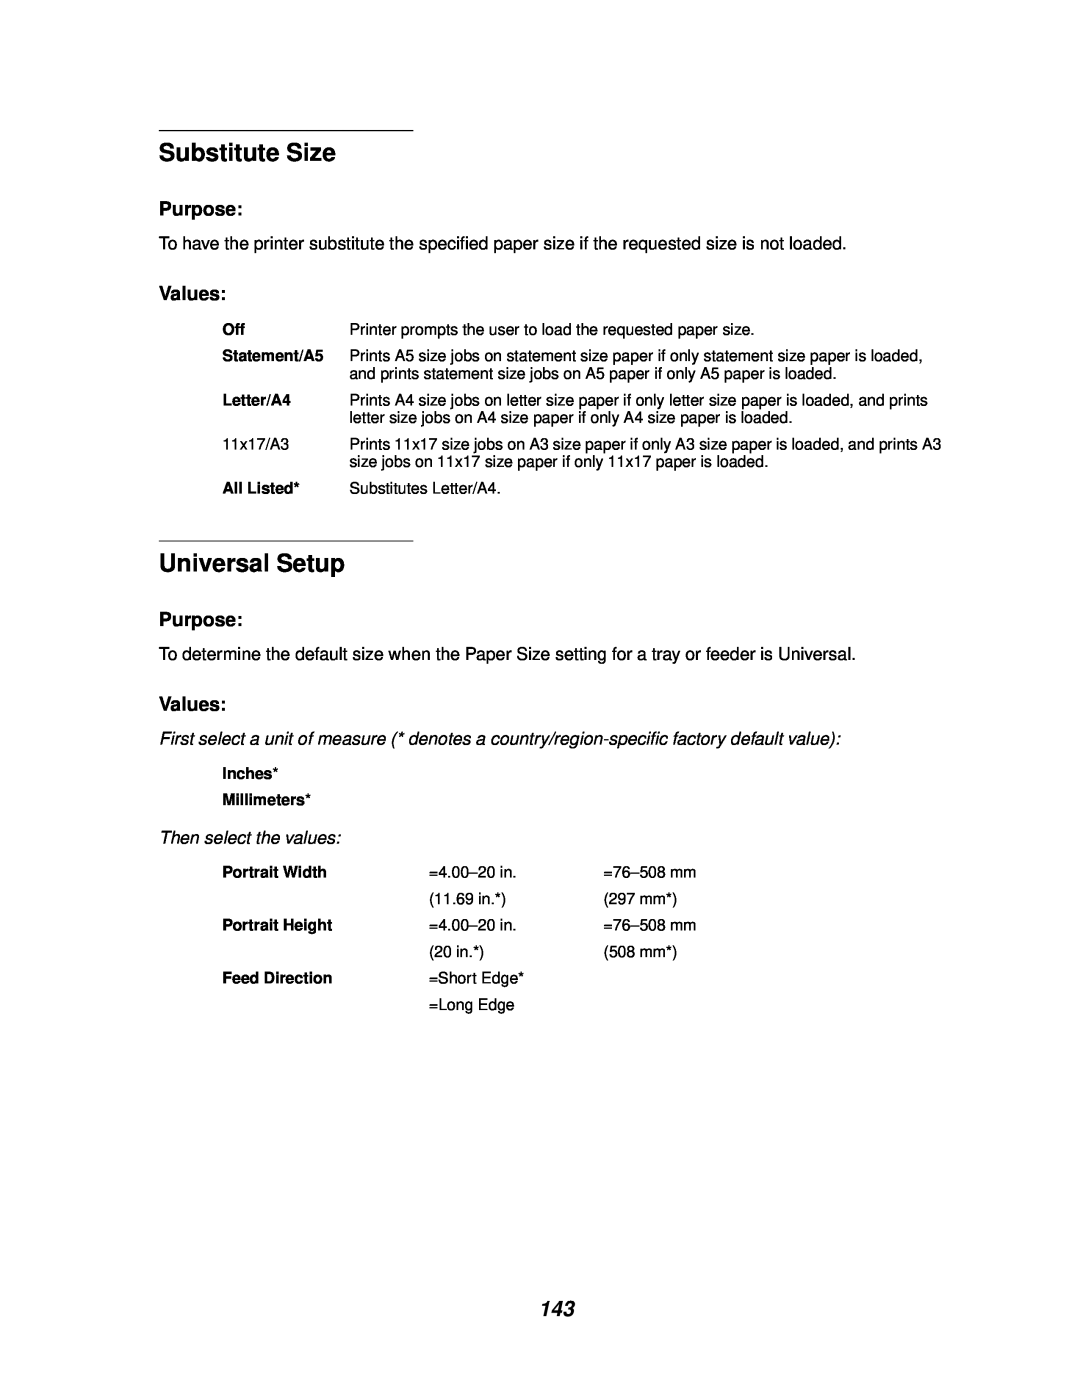 Lexmark 812 manual Substitute Size, Universal Setup, Purpose, Values, Then select the values 